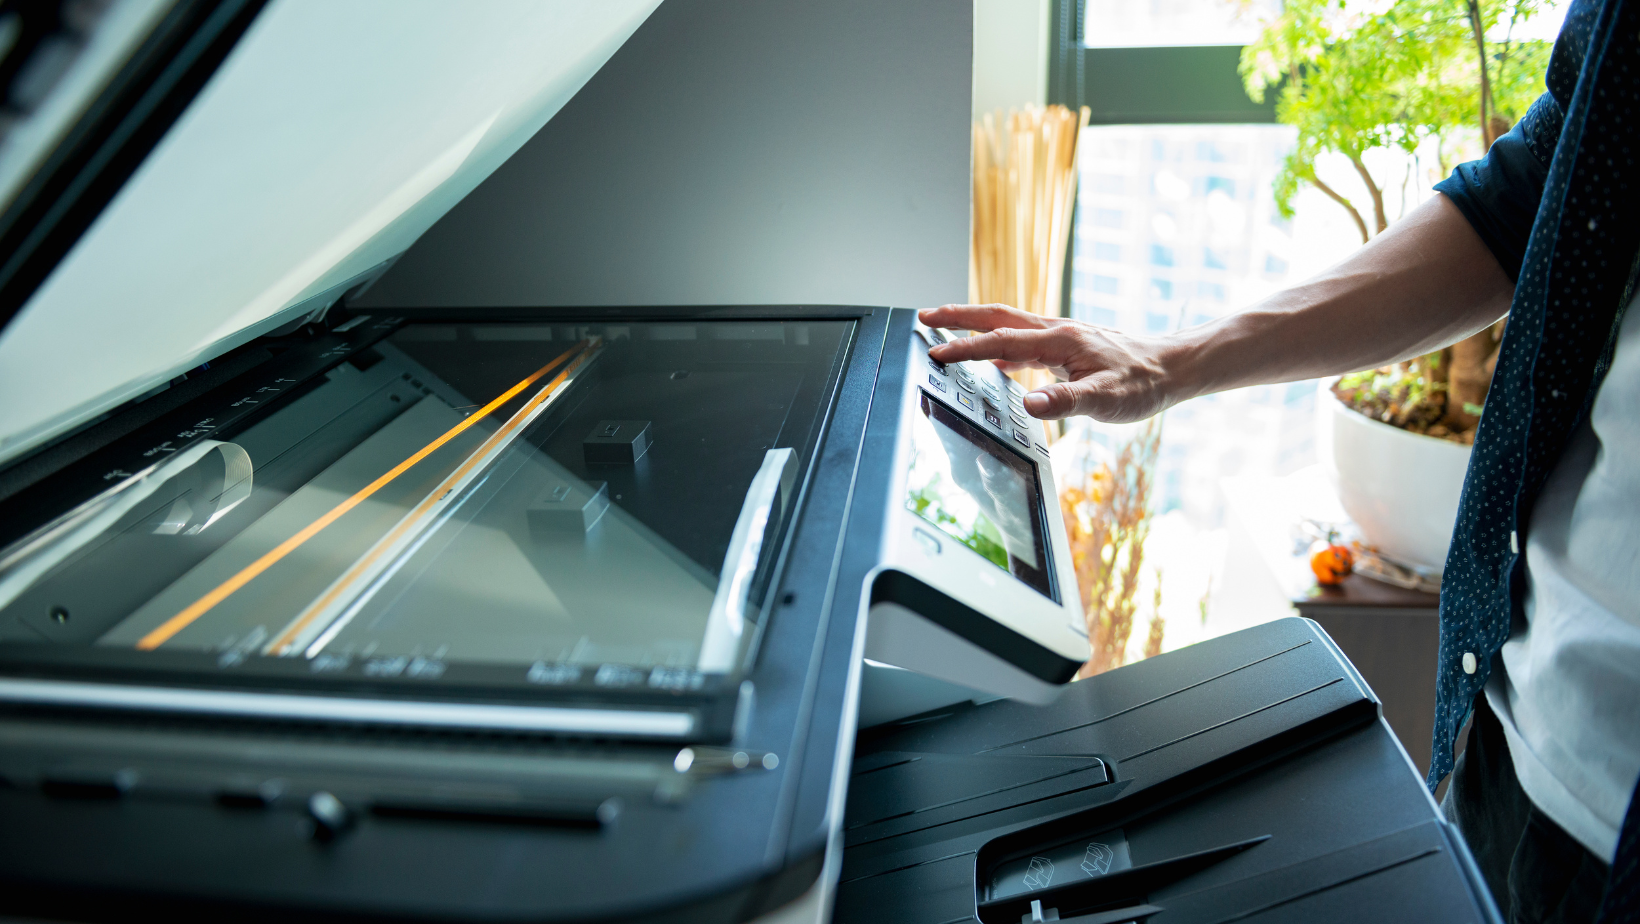 3 Simple Ways To Reduce Your Office Printing Costs